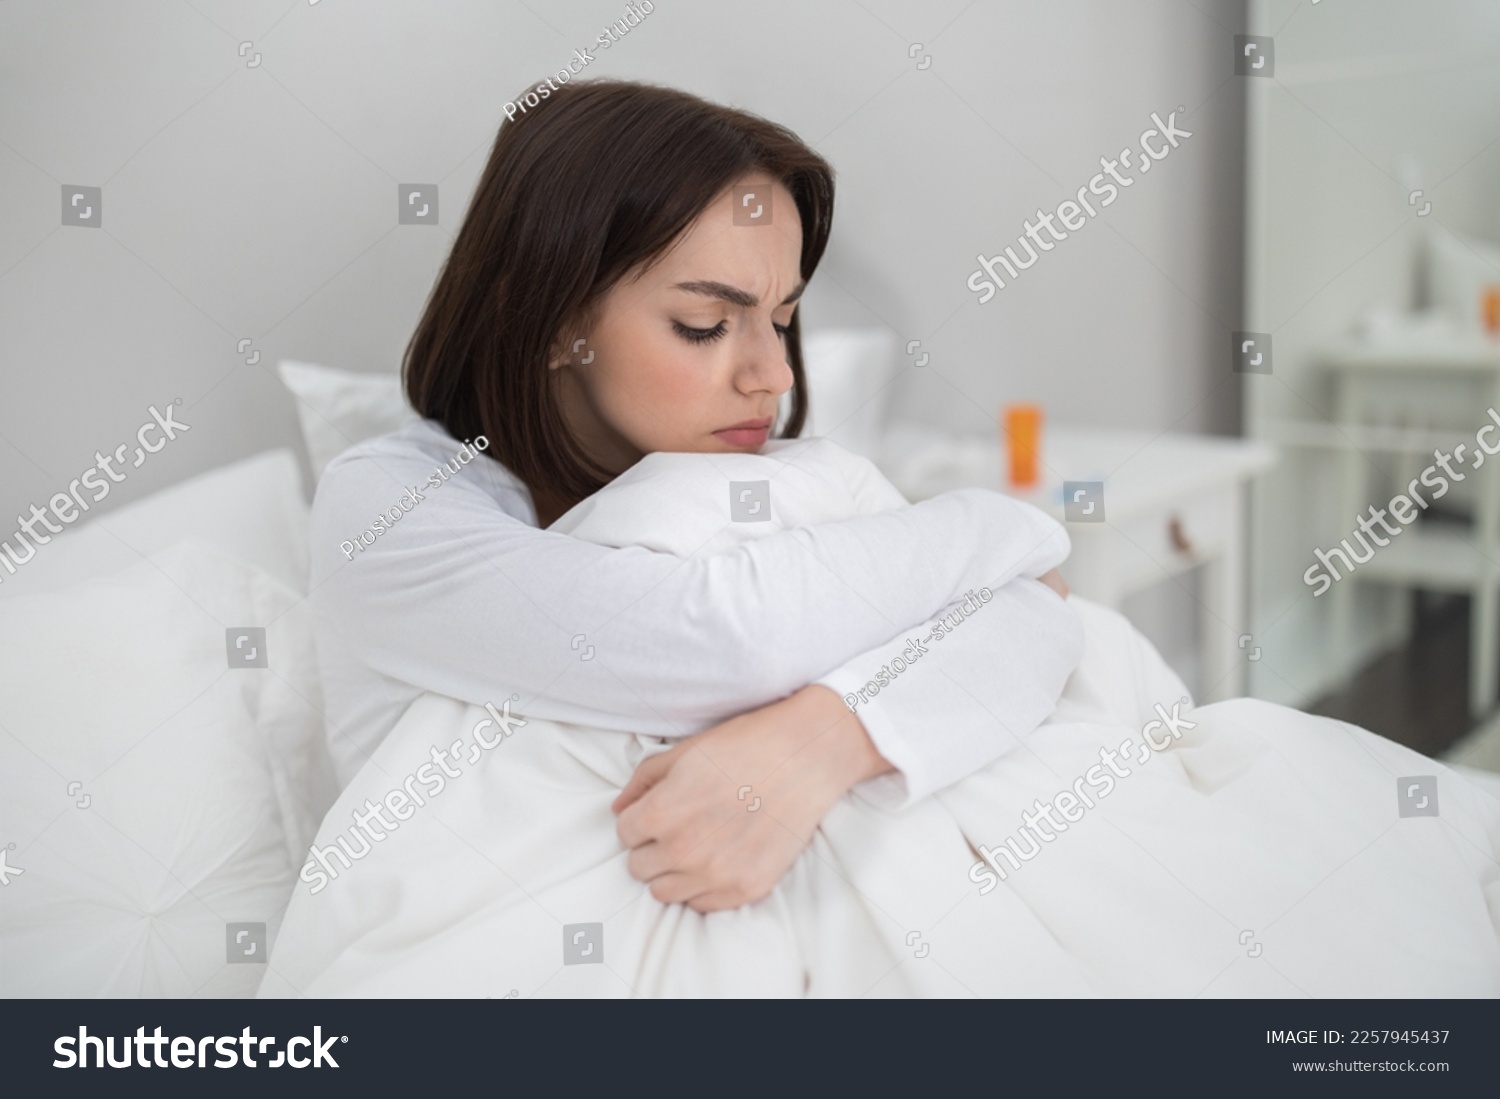 Young sick unhappy brunette woman sitting in bed at home, lady got cold, flu or coronavirus, suffering from period cramps or headache, medicine on bedside table, copy space #2257945437